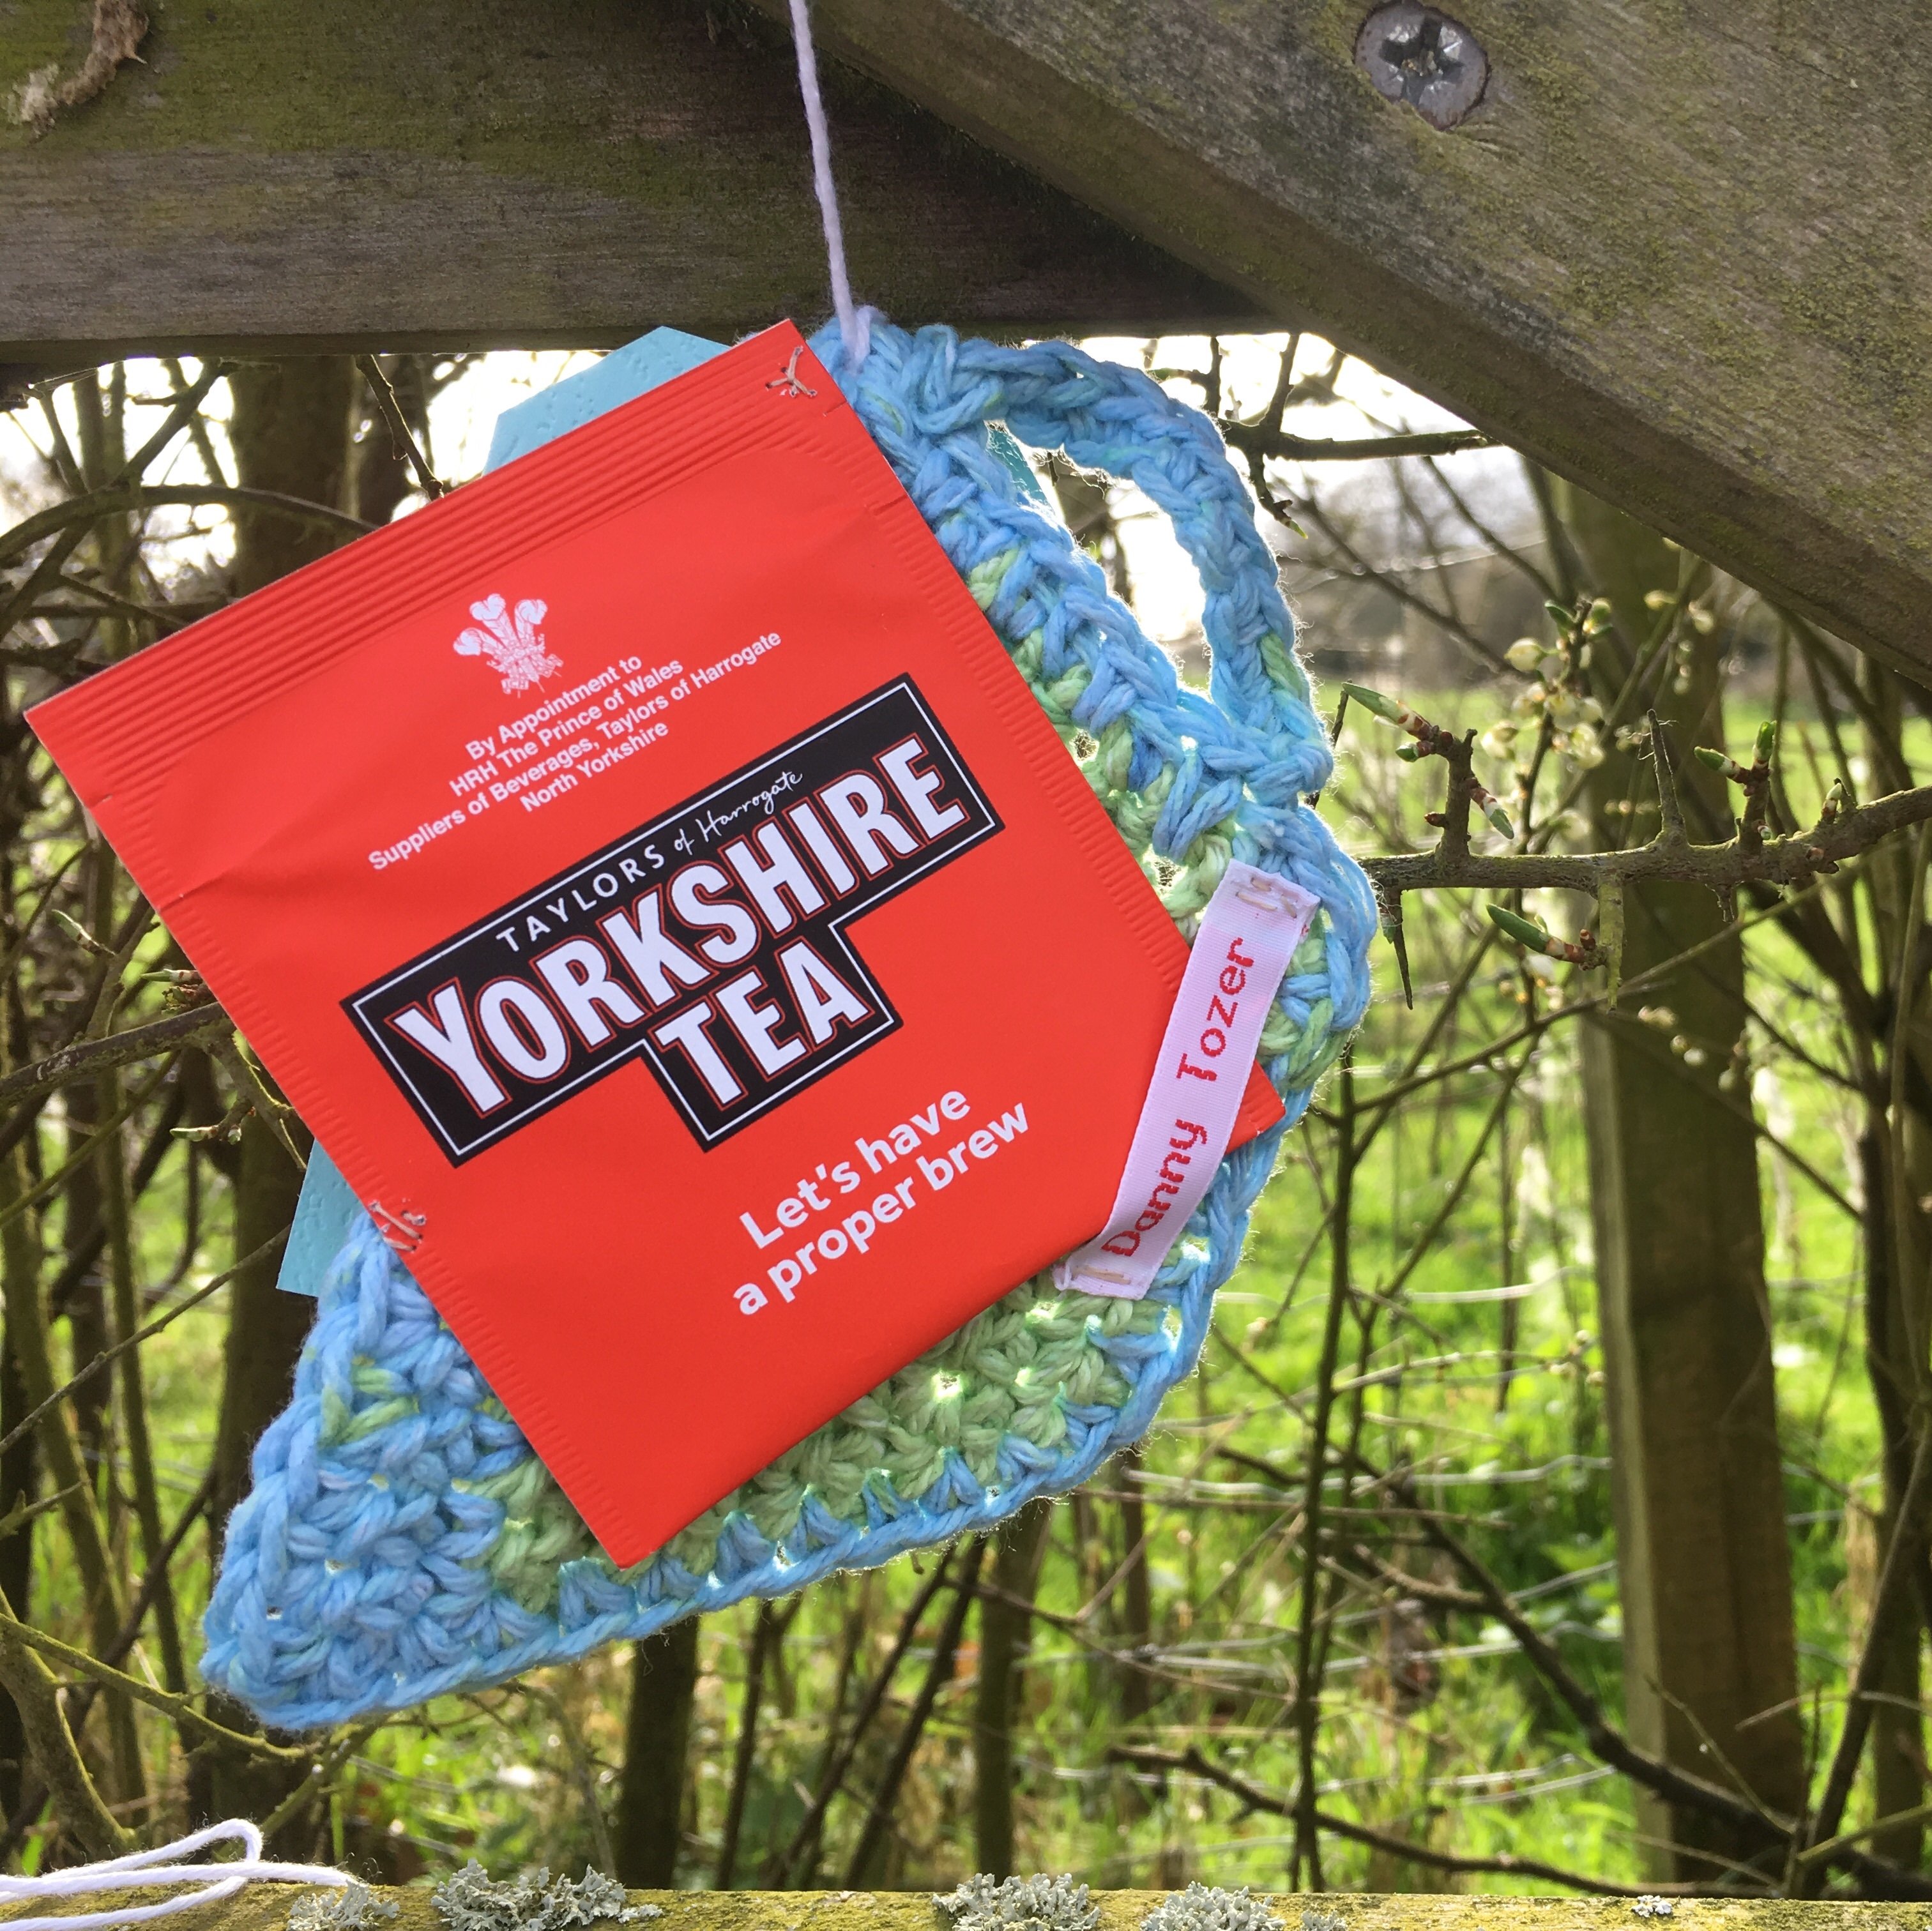 A red Yorkshire Teabag hangs on a crocheted teacup off a fence